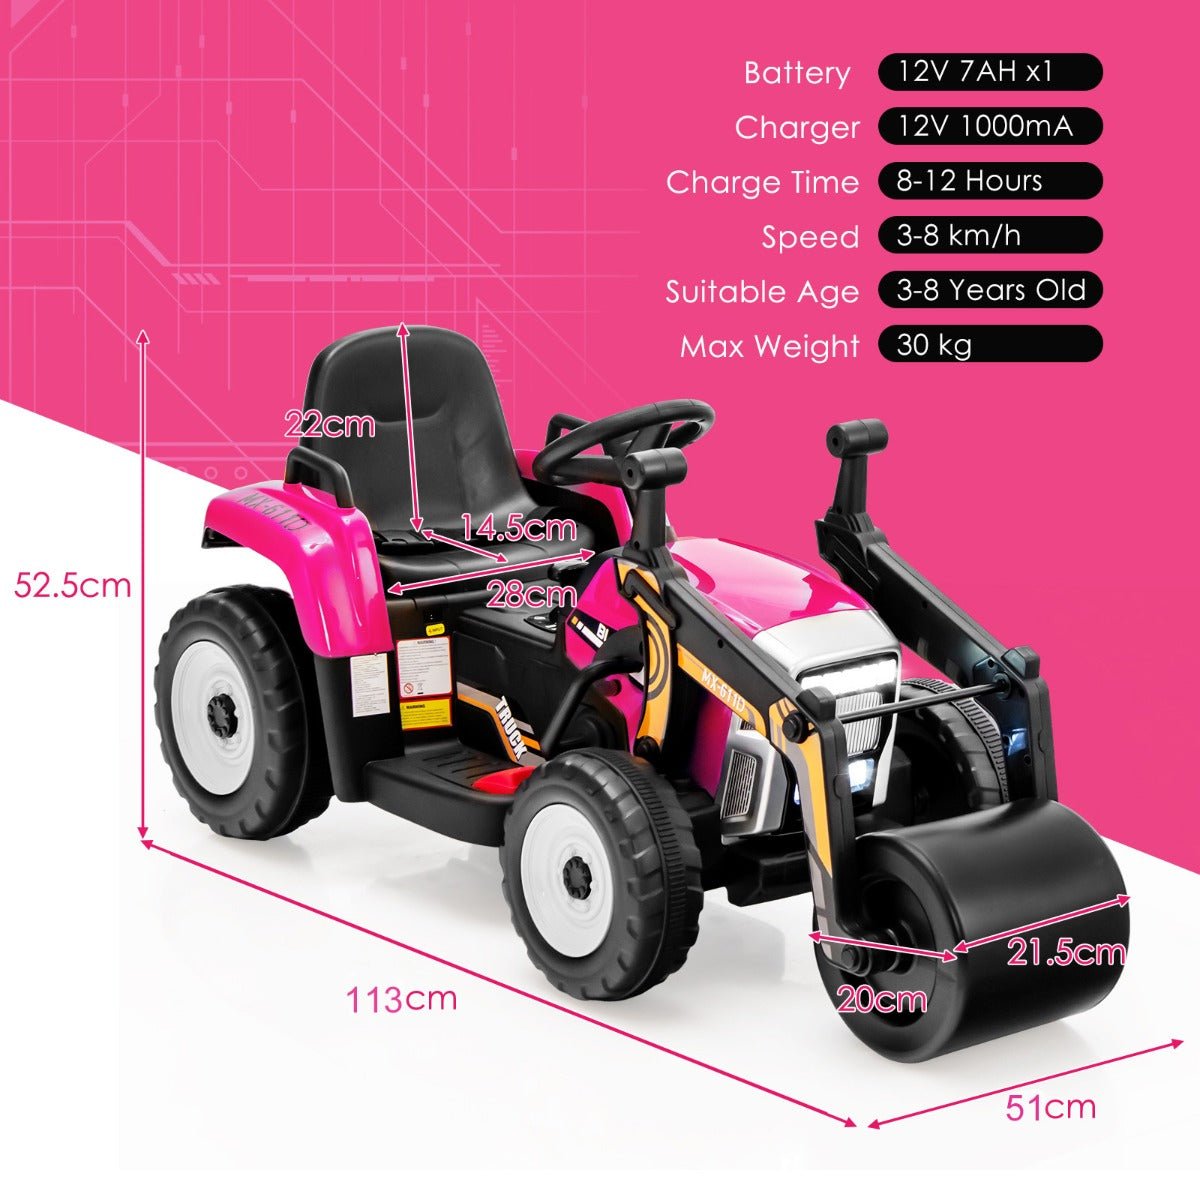 Experience the Joy of Riding with the Pink 12V Kids Road Roller